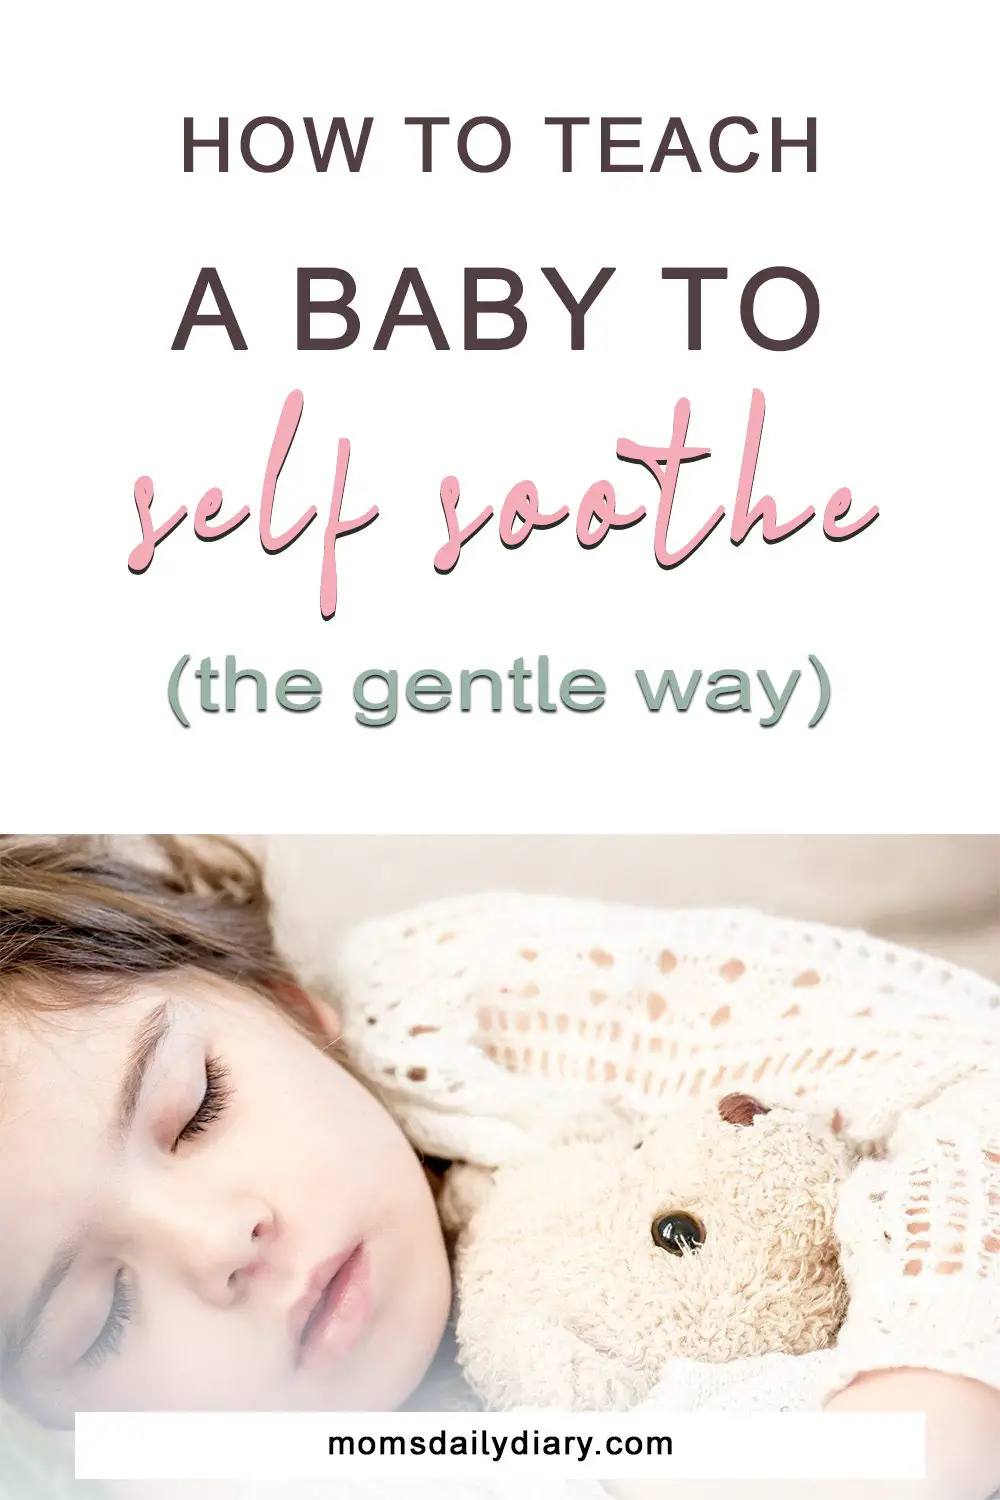 How to teach a baby to self soothe (the gentle way)